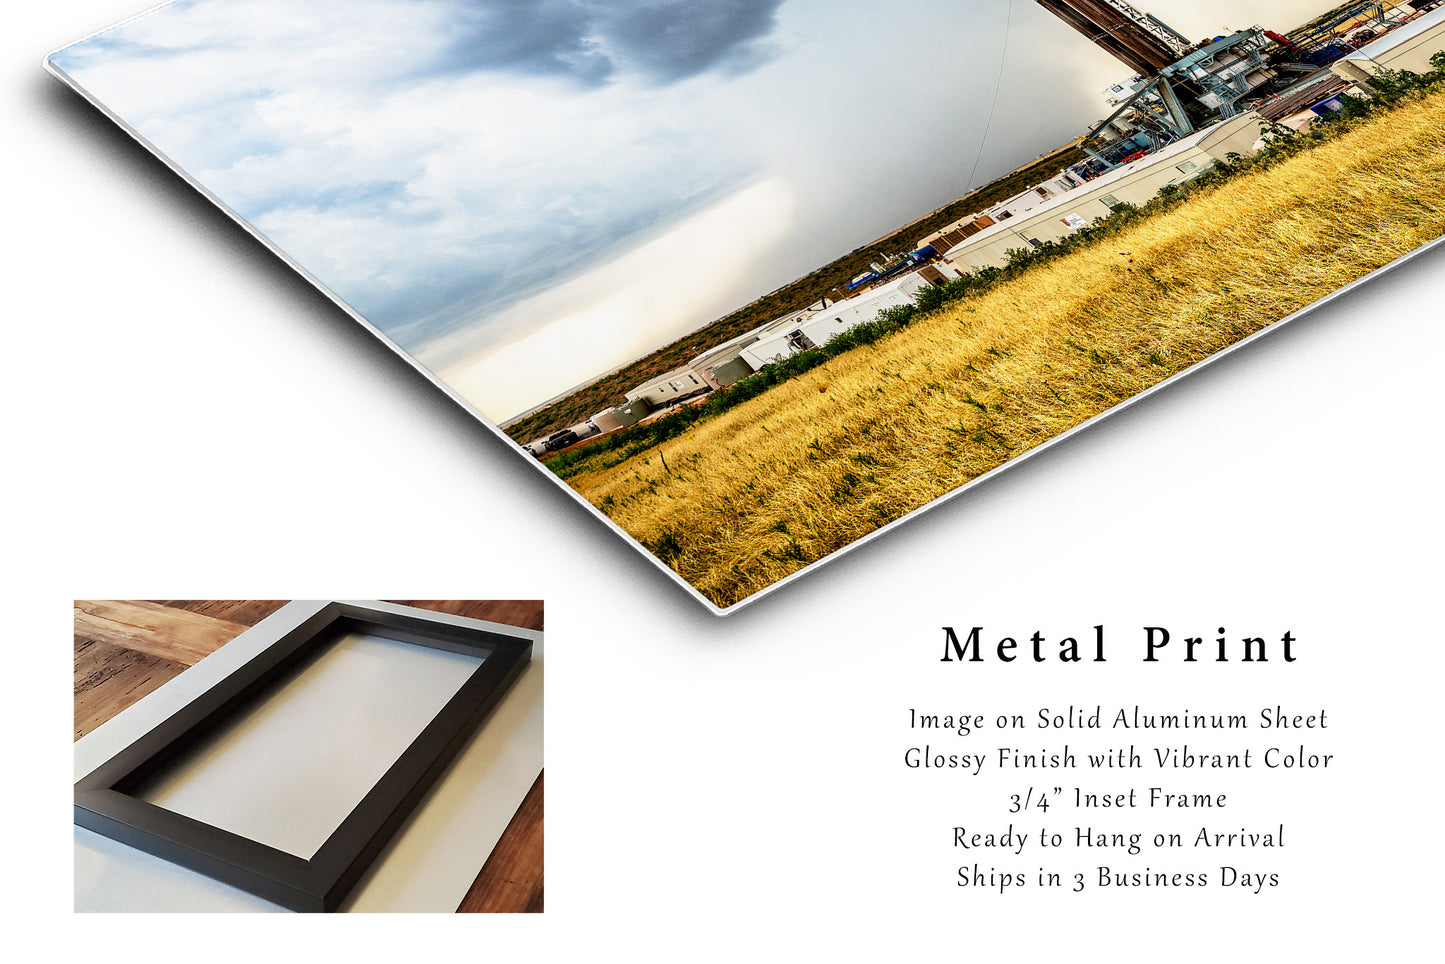 Drilling Rig Metal Print | Storm Photography | Oil and Gas Wall Art | Oklahoma Photo | Oilfield Decor | Ready to Hang